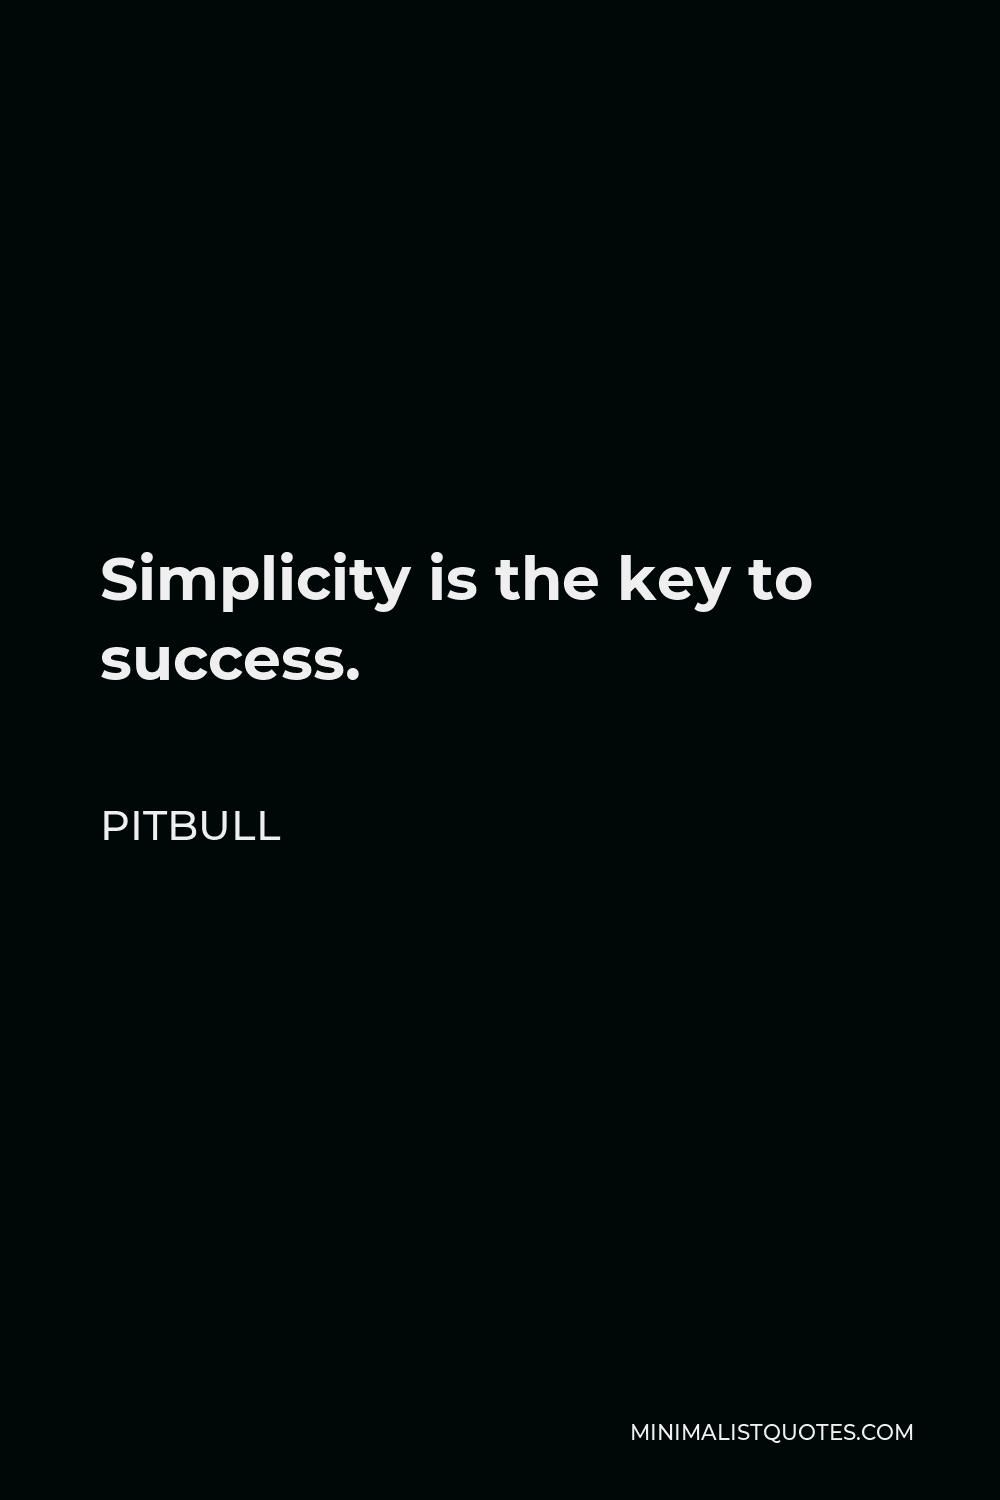 Pitbull Quote - Simplicity is the key to success.